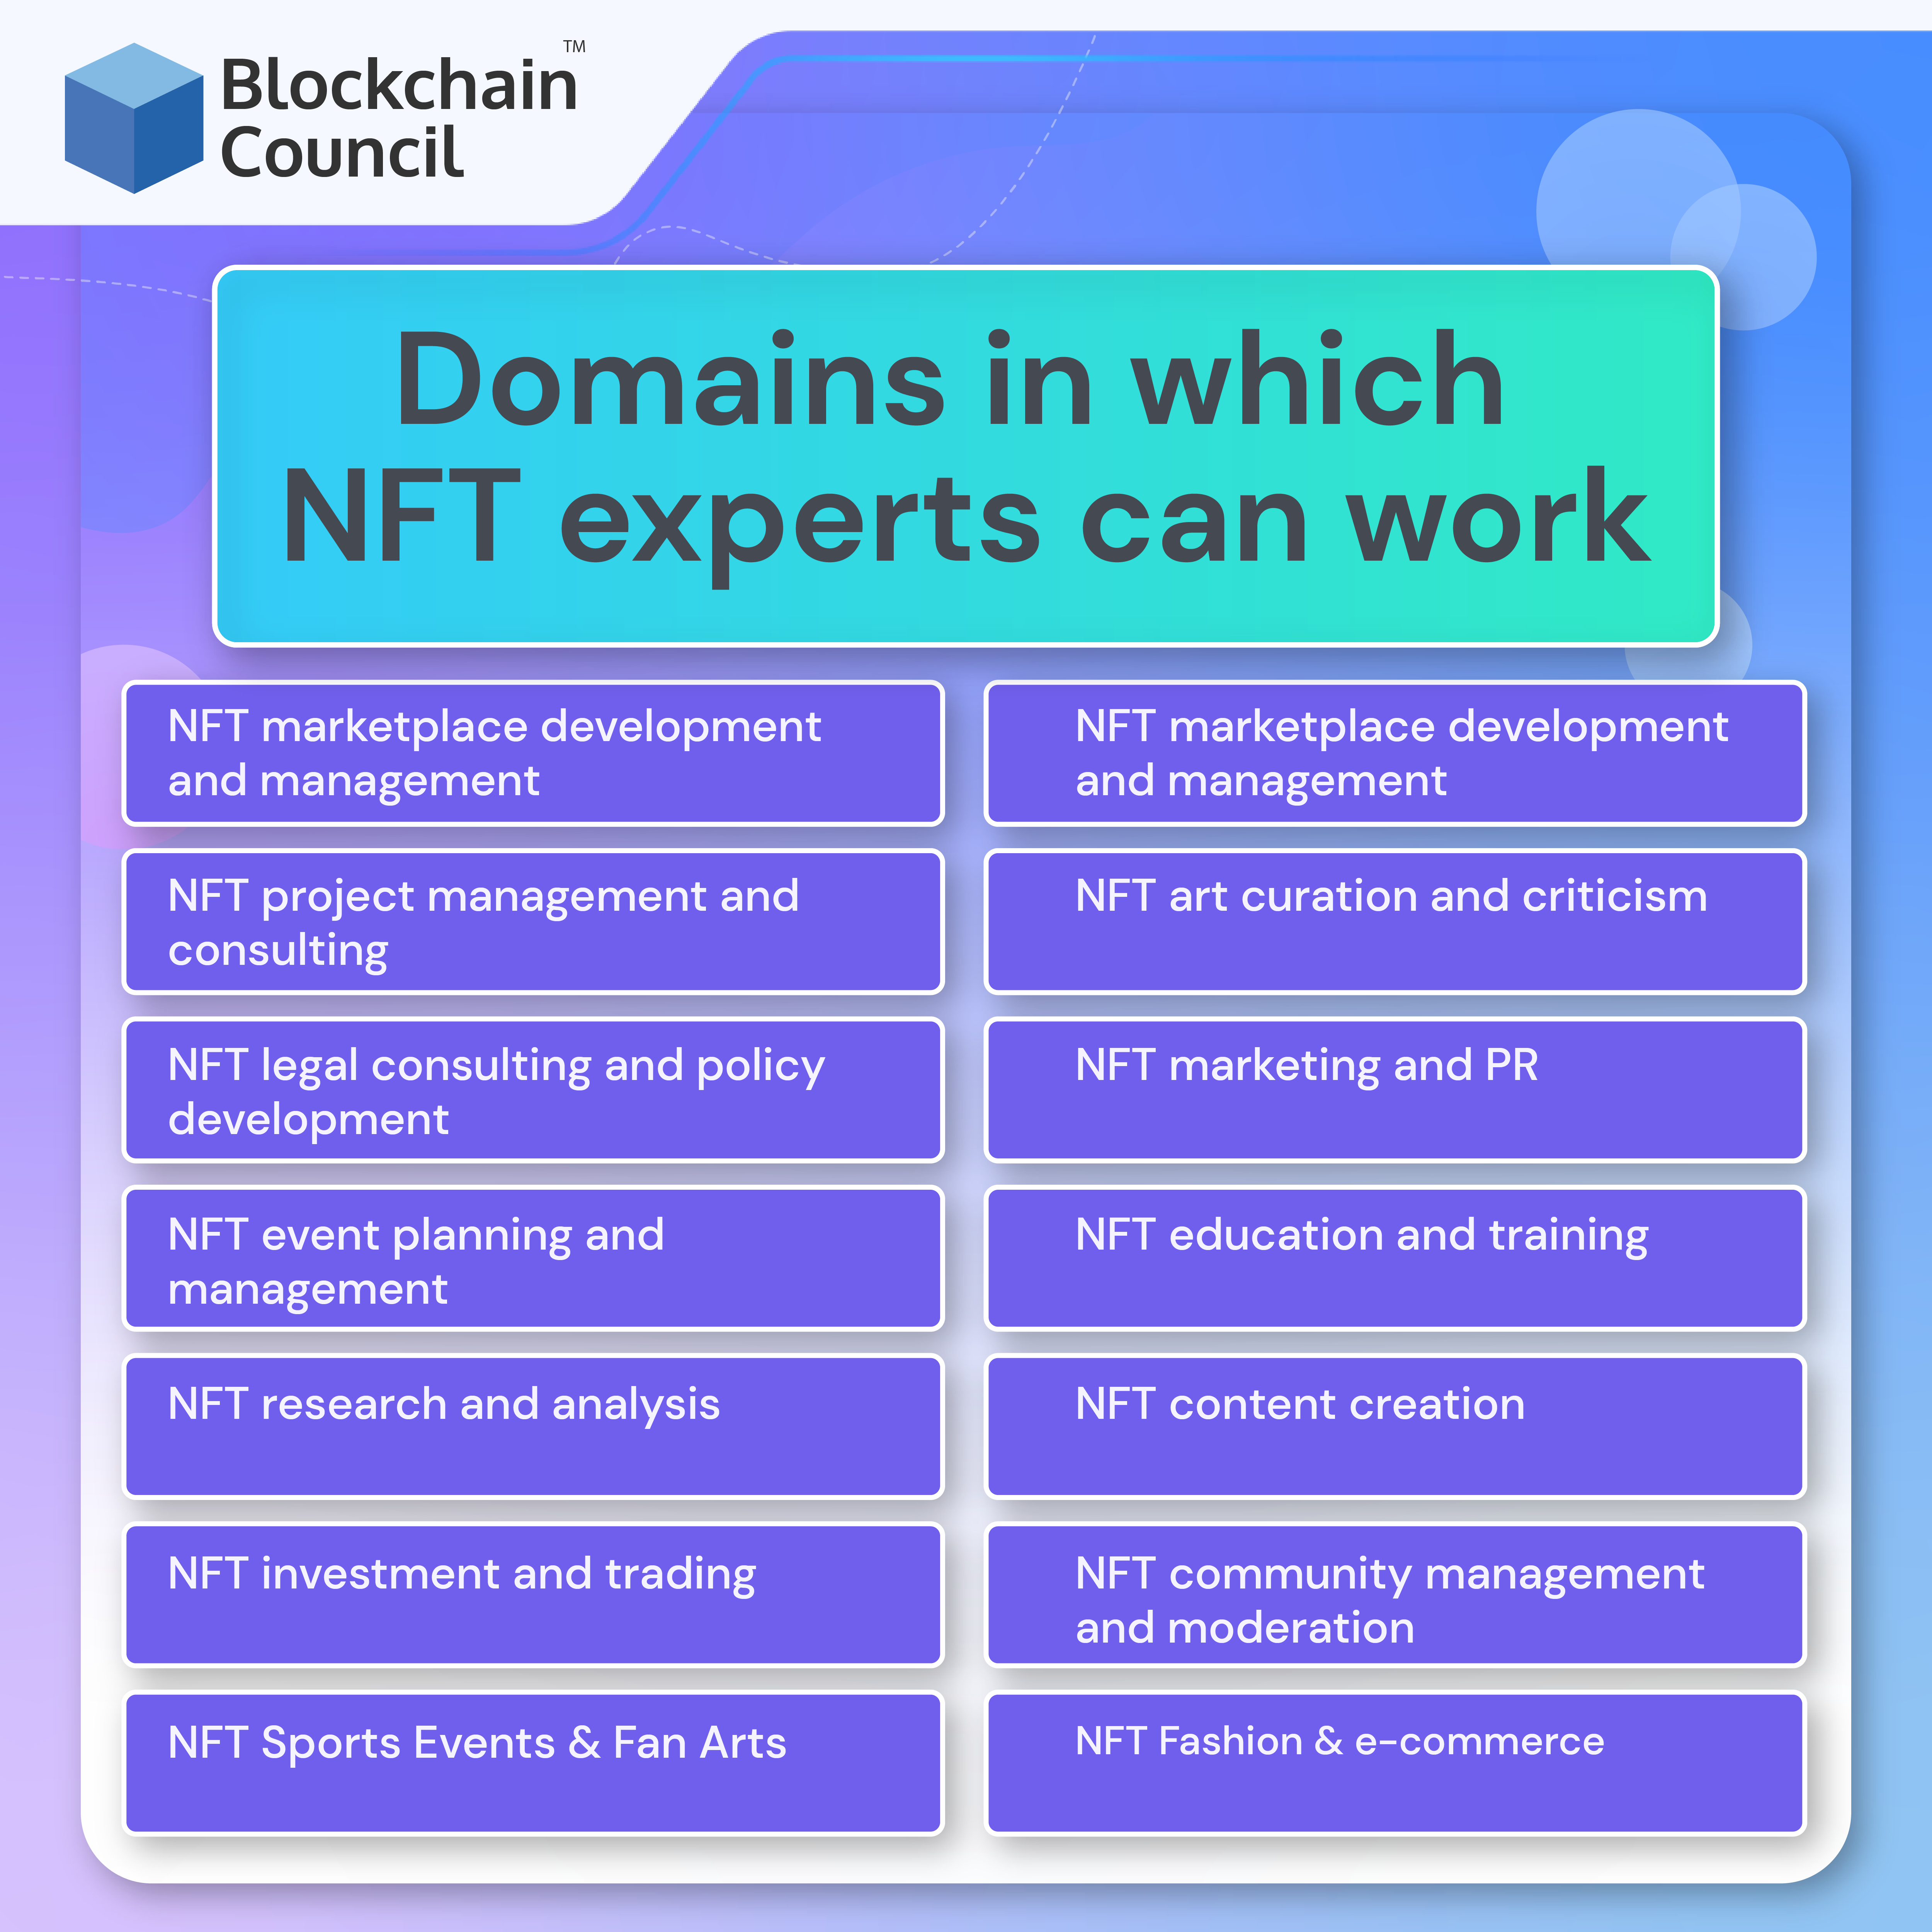 Domains in which NFT experts can work